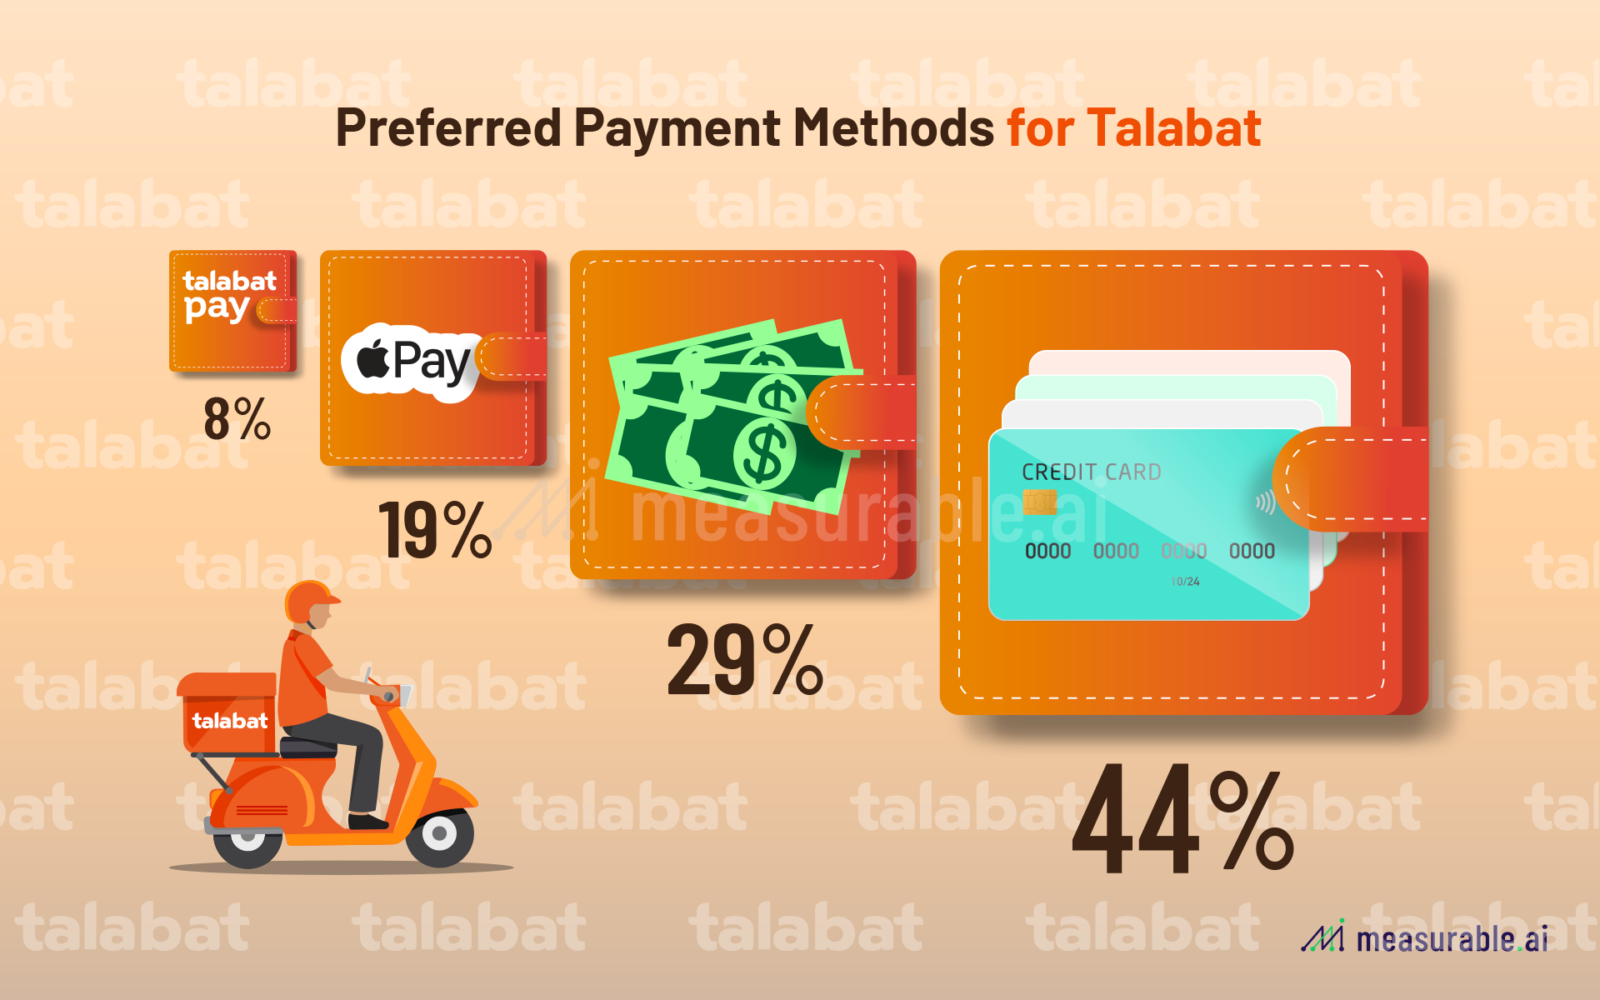 Preferred Payment Methods for Talabat in the UAE